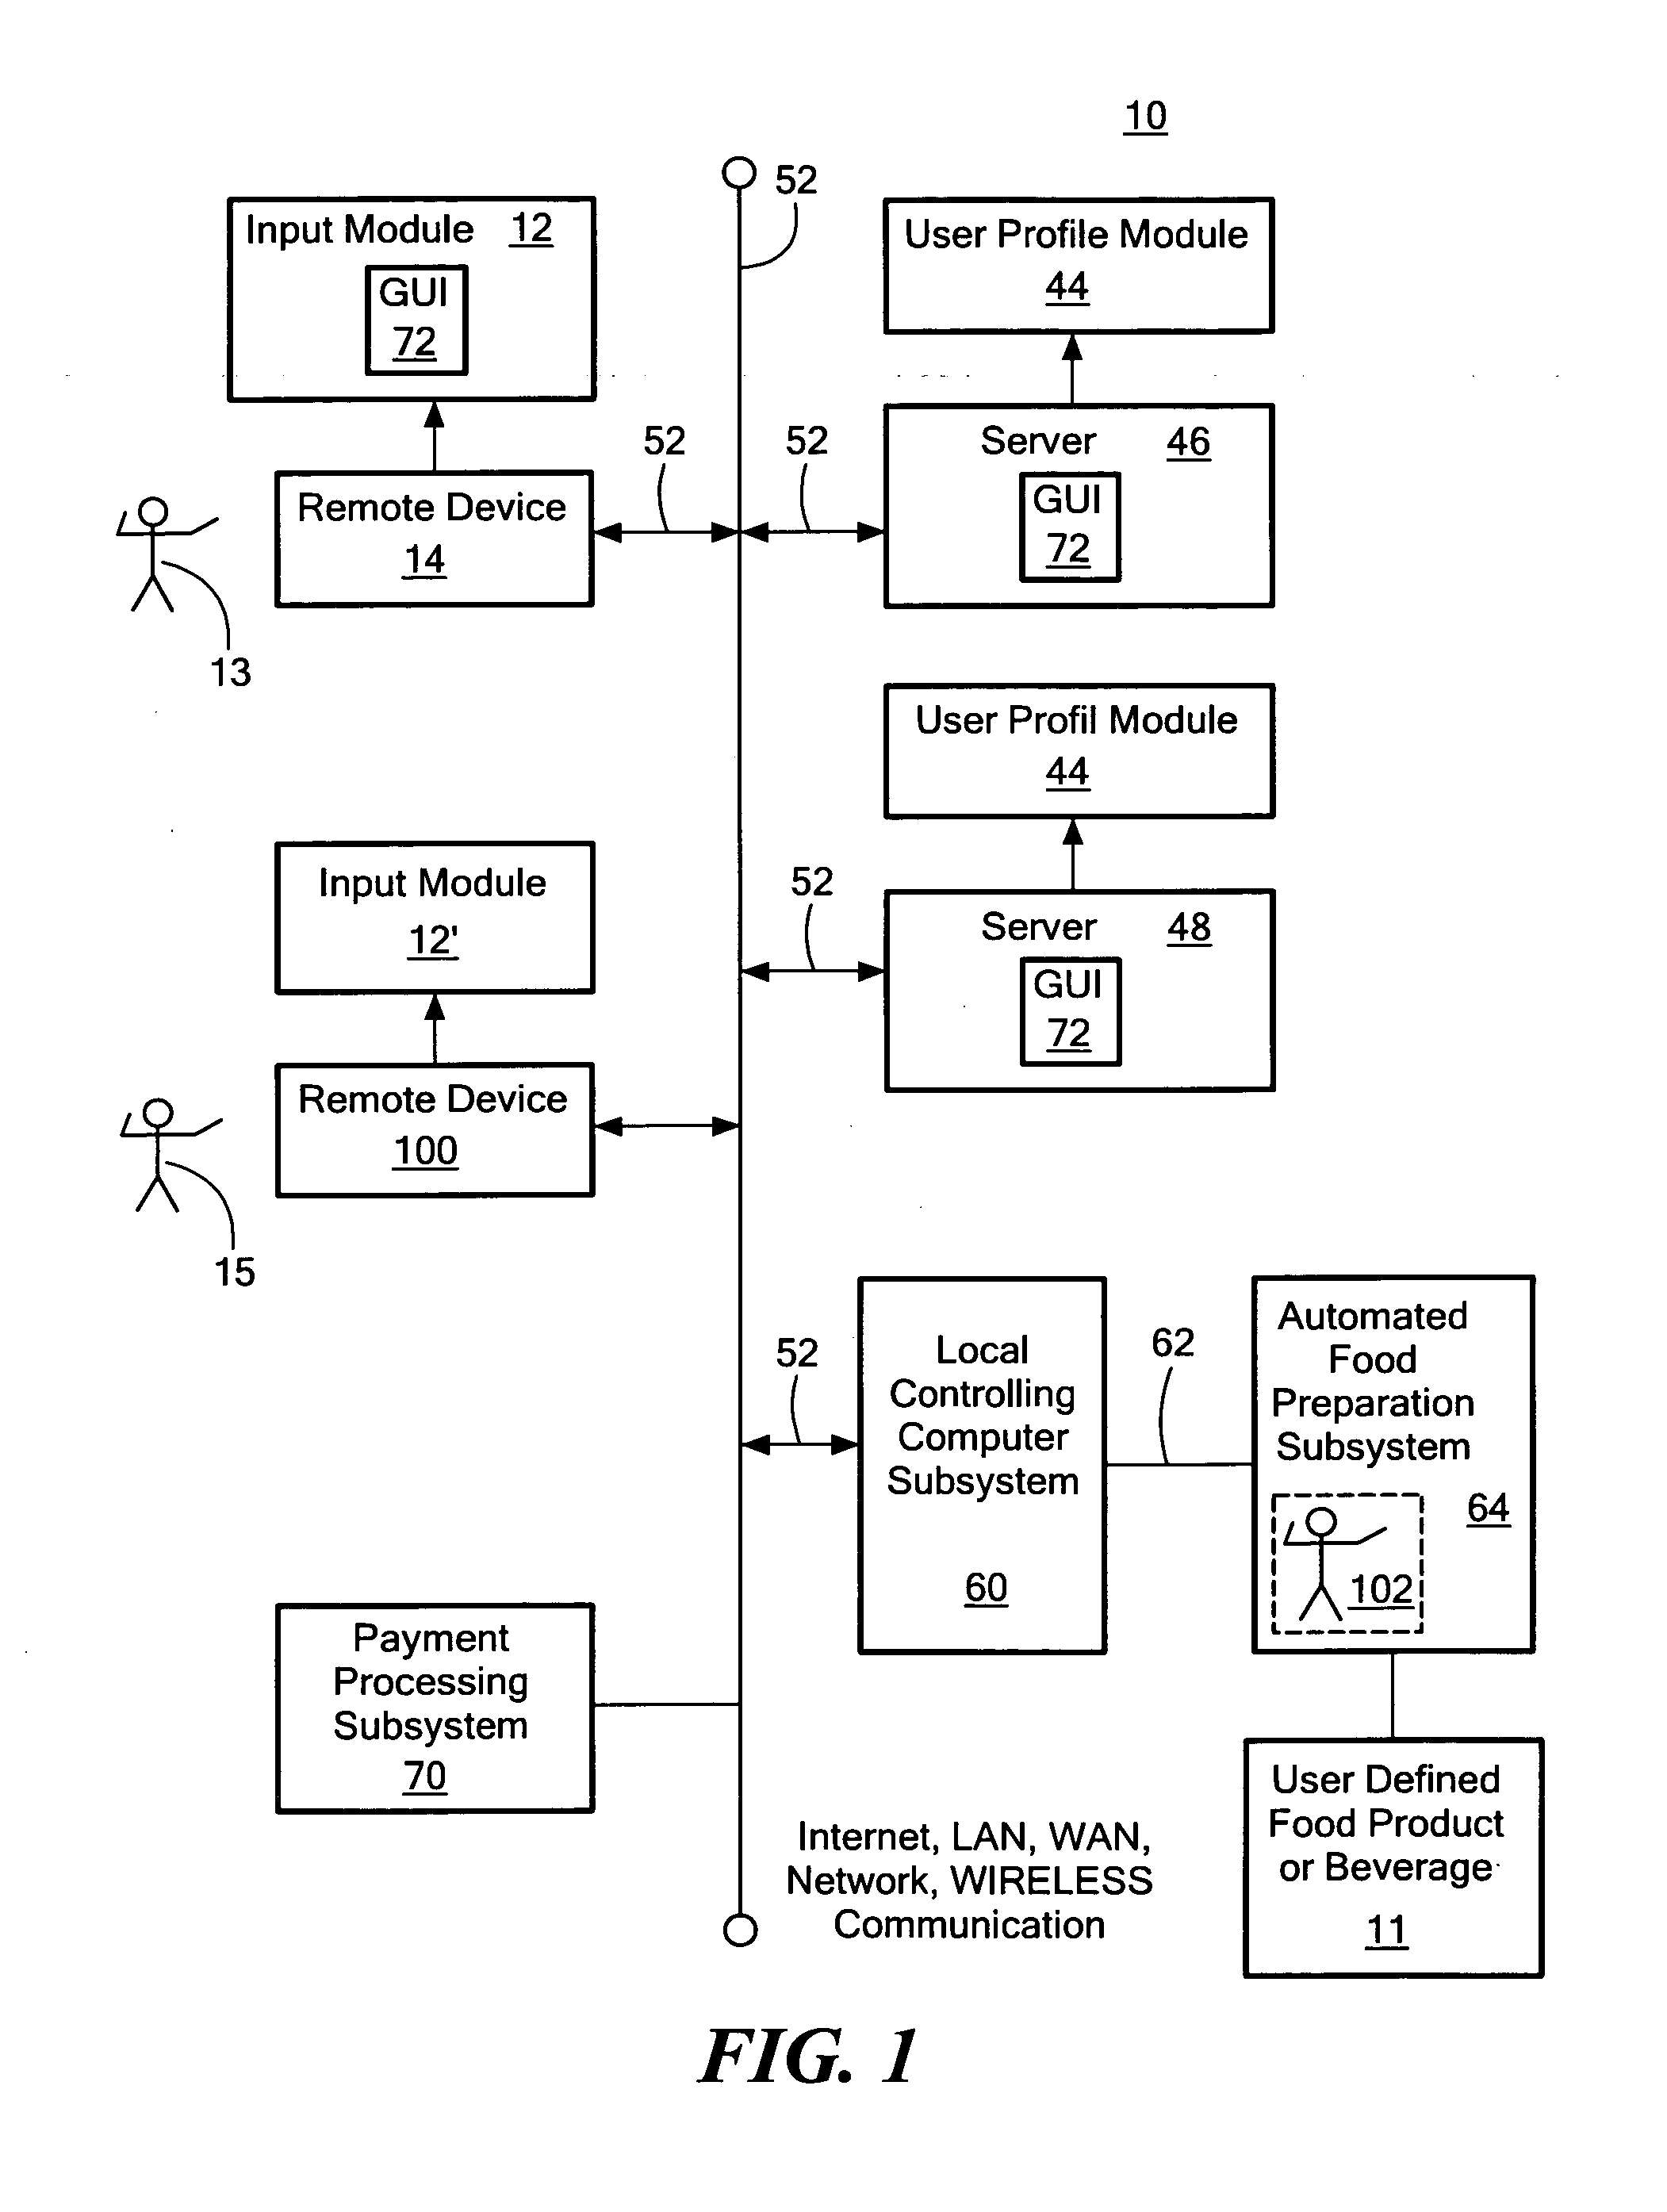 Remotely controlled system and method for the preparation of a user-defined food product or beverage